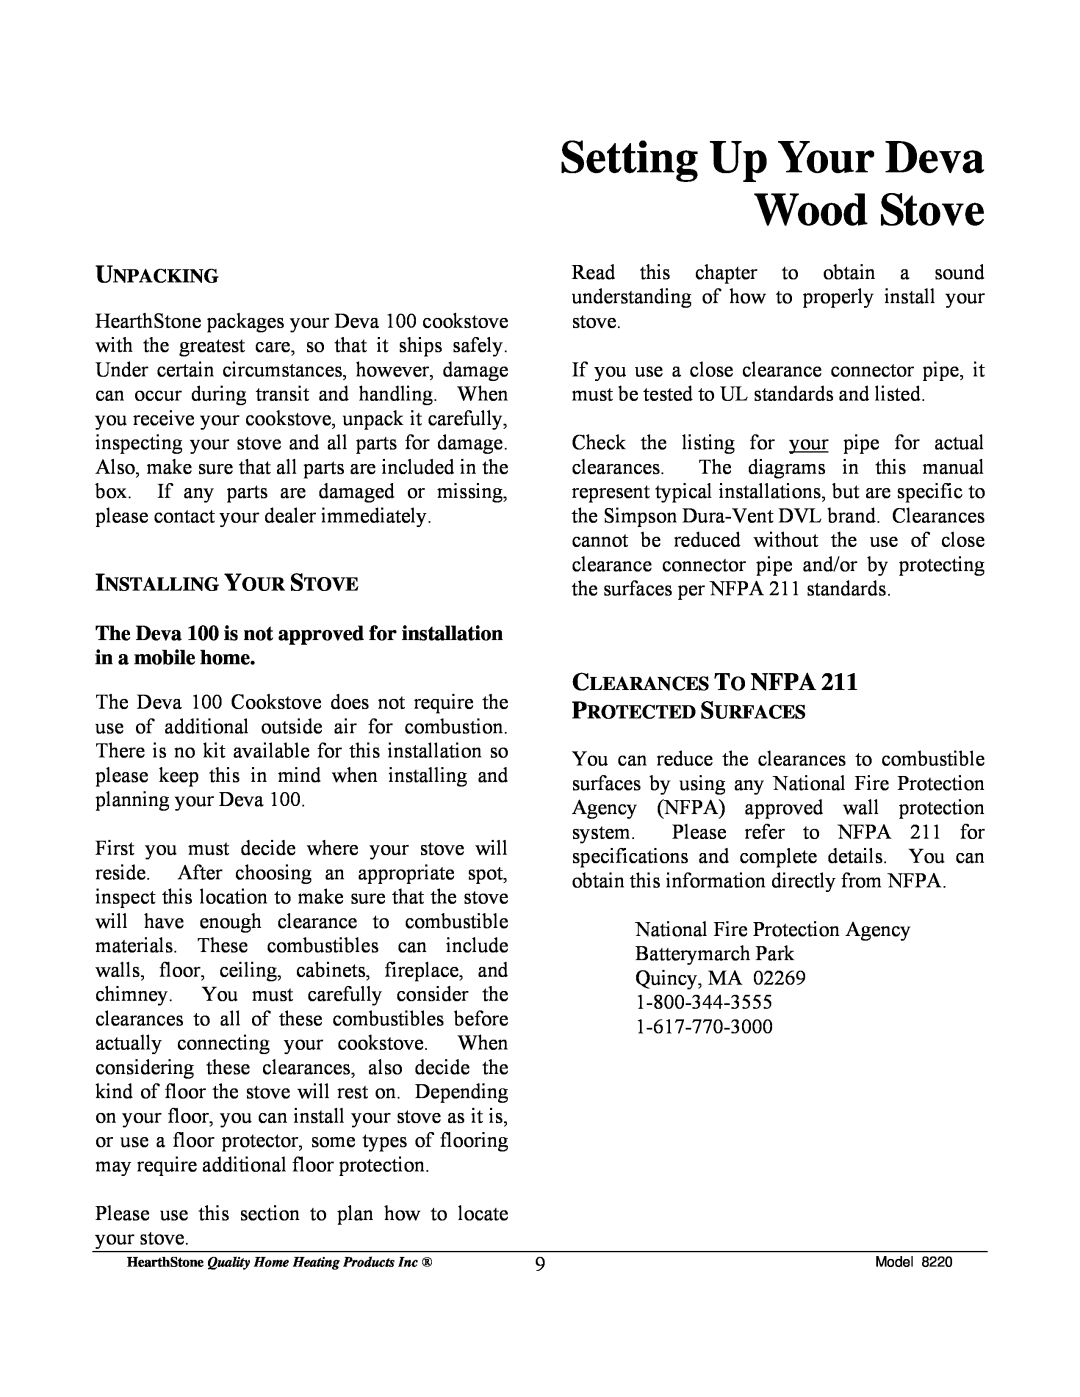 Weiman Products Deva 100 owner manual Setting Up Your Deva Wood Stove 